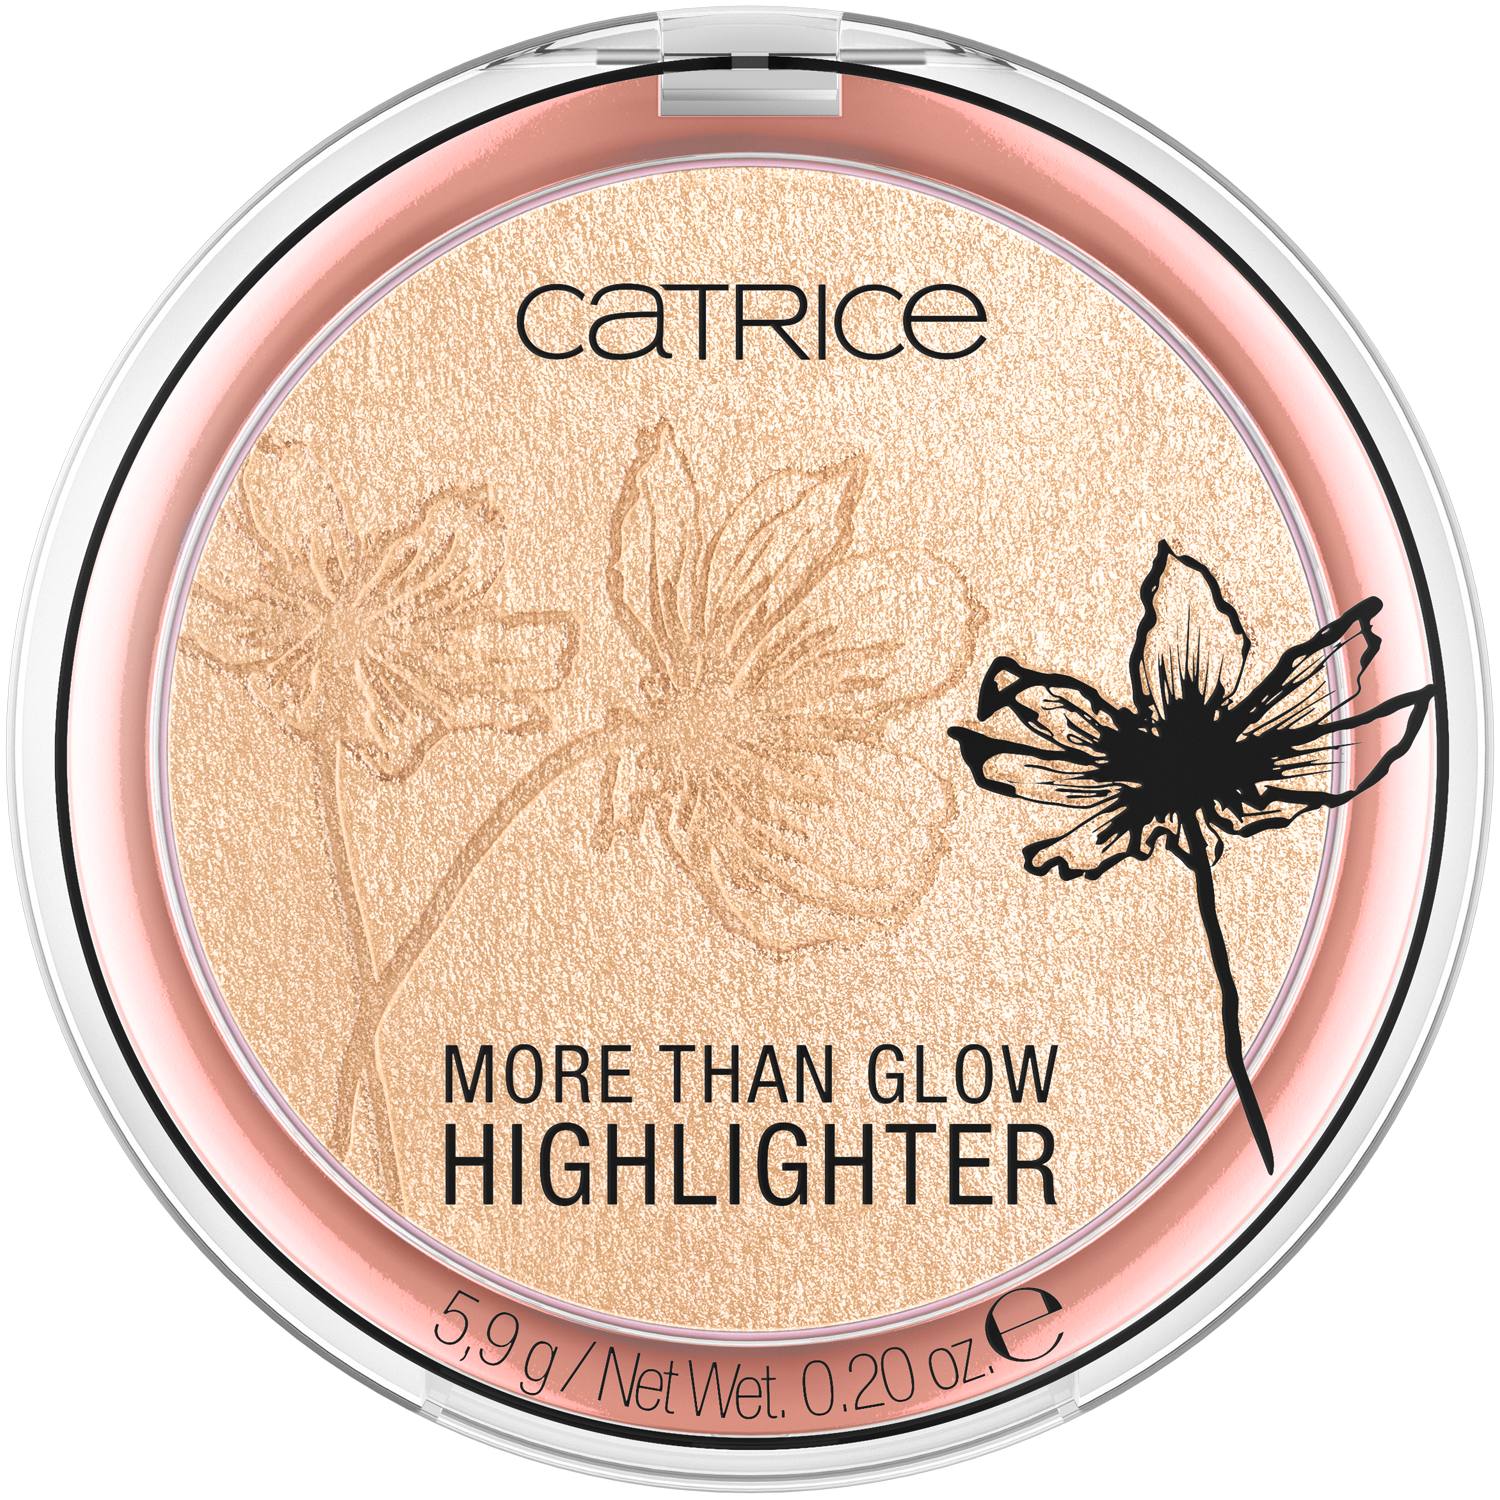 Catrice More Than Glow